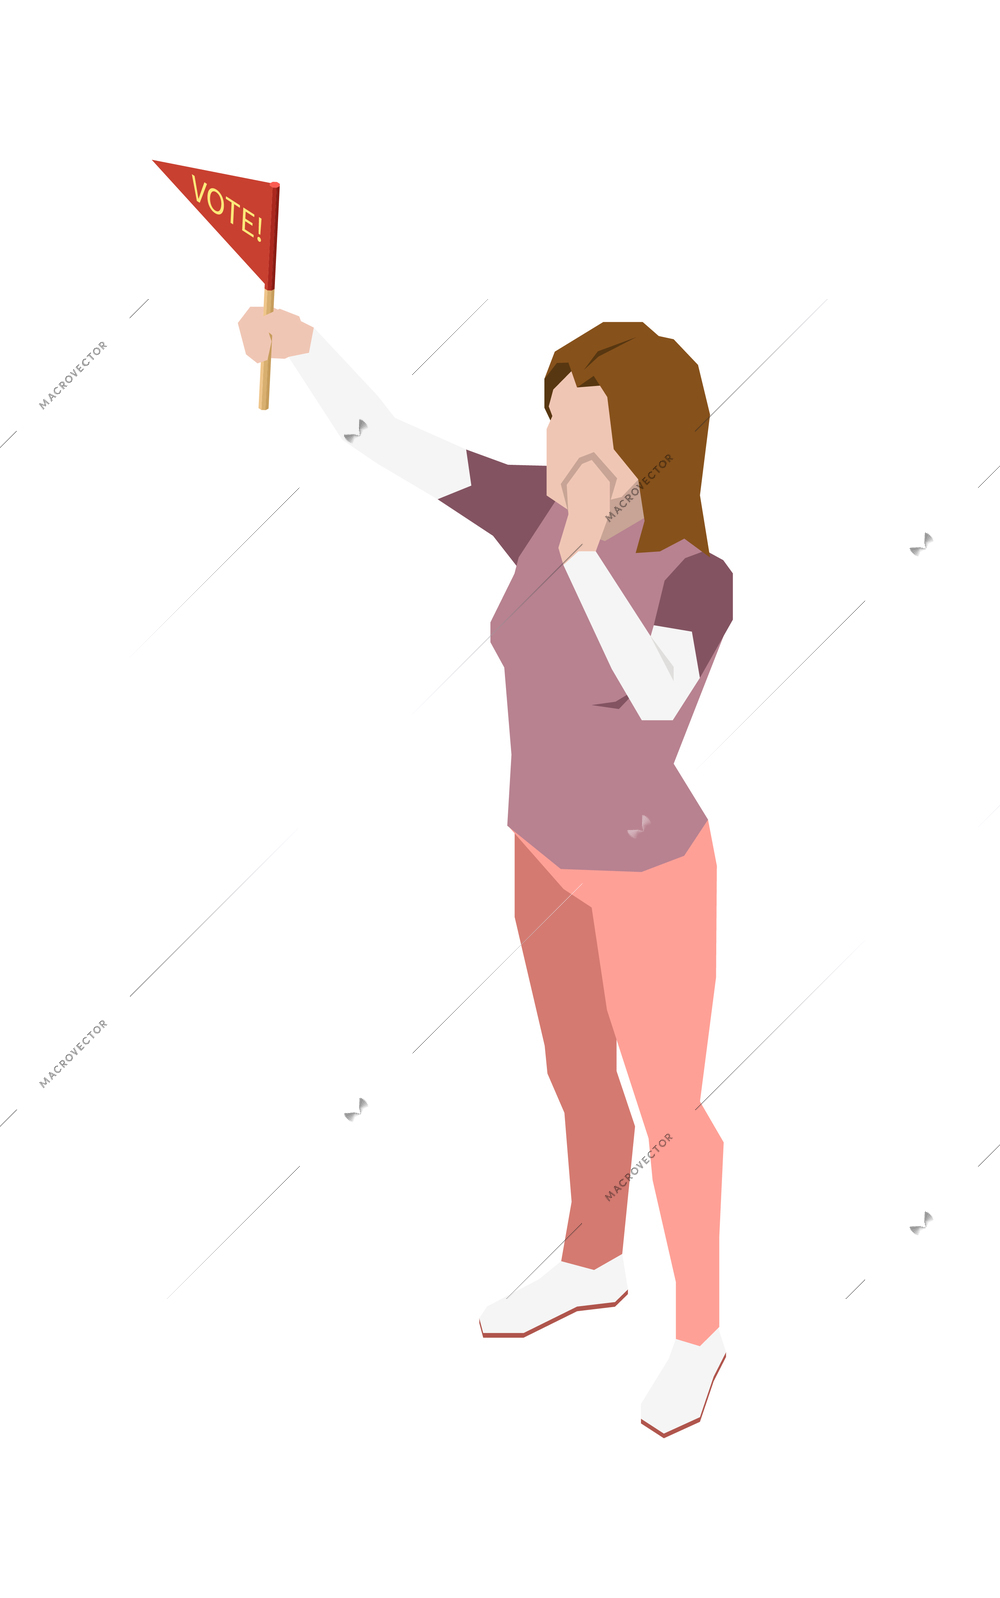 Election voting agitation isometric icon with woman holding flag 3d vector illustration